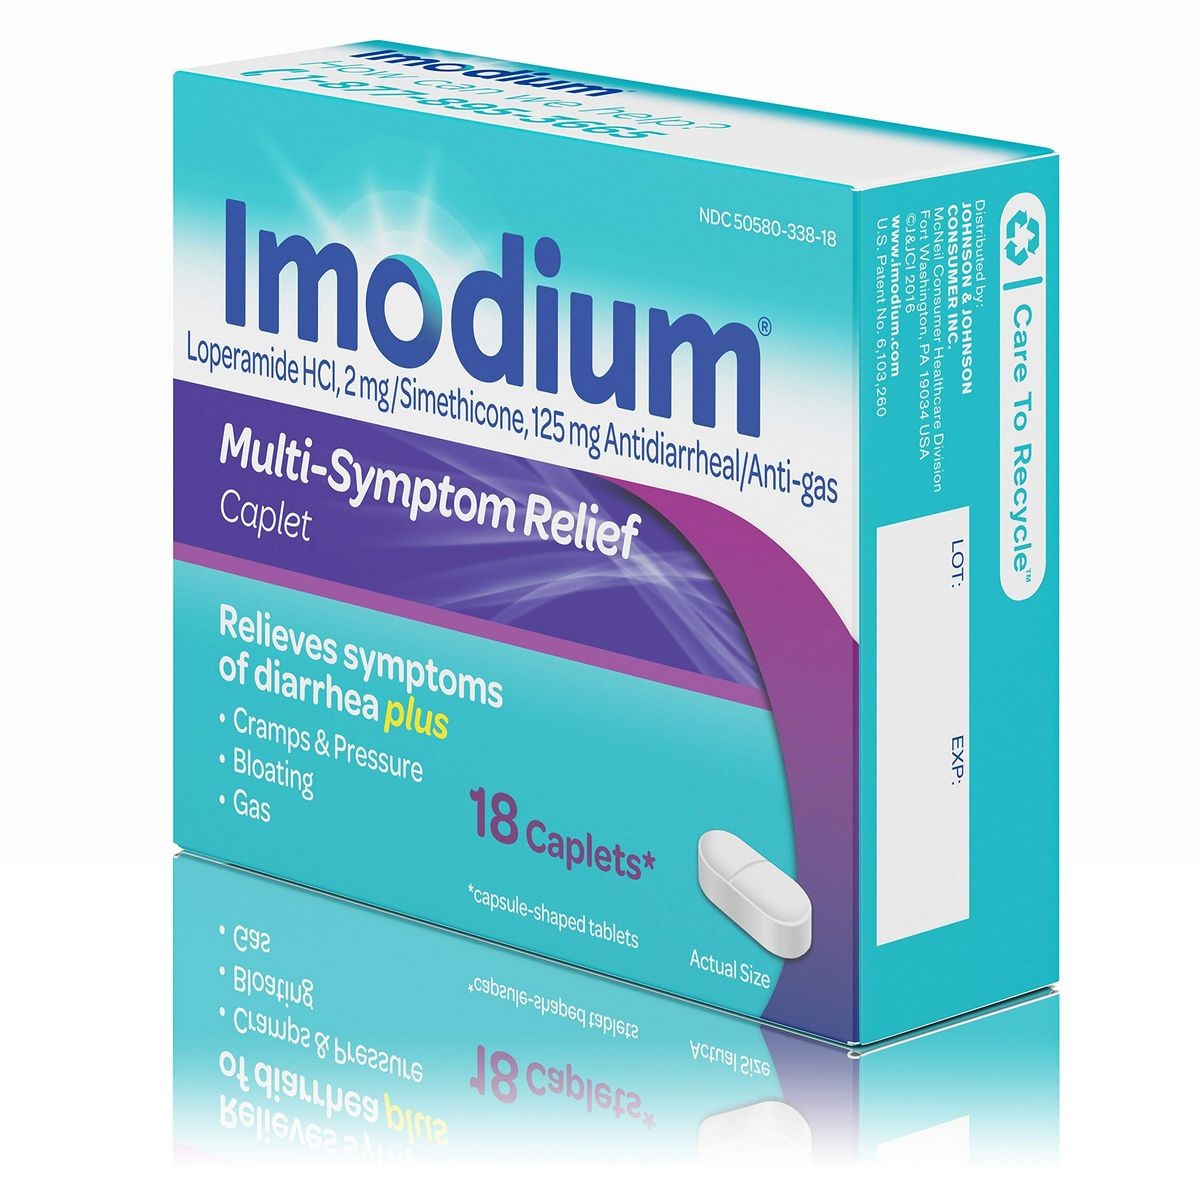 LOPERAMIDE SIMETHICONE - ORAL Imodium Advanced side effects medical uses and drug interactions